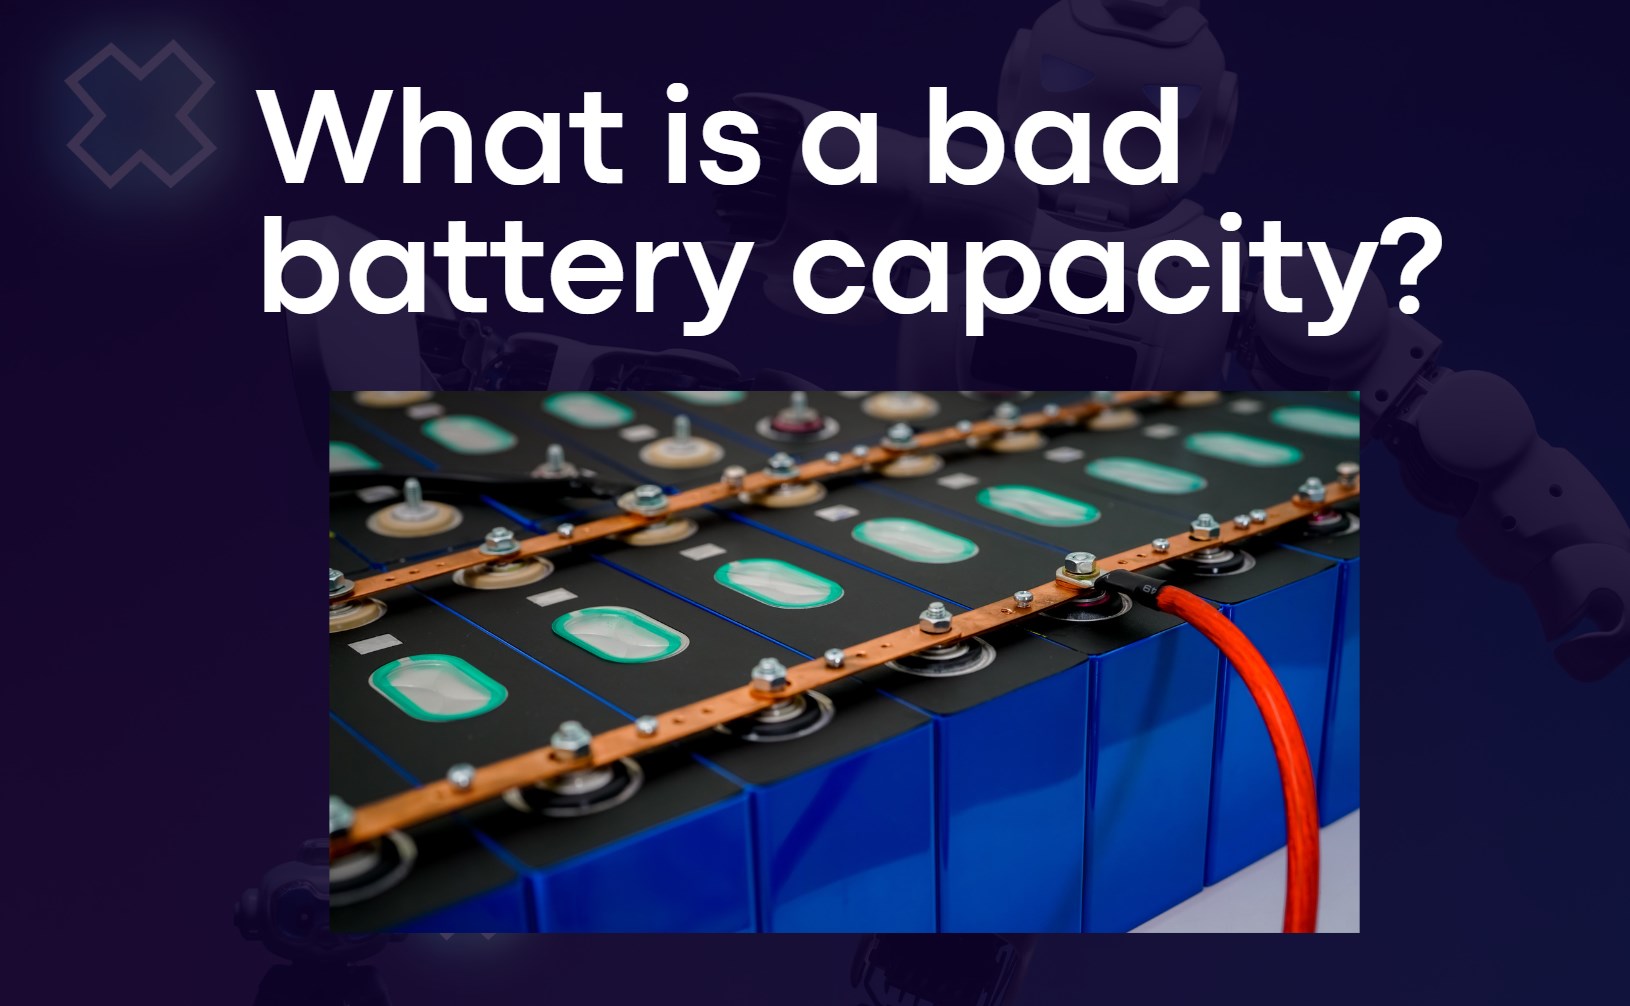 What is a bad battery capacity?